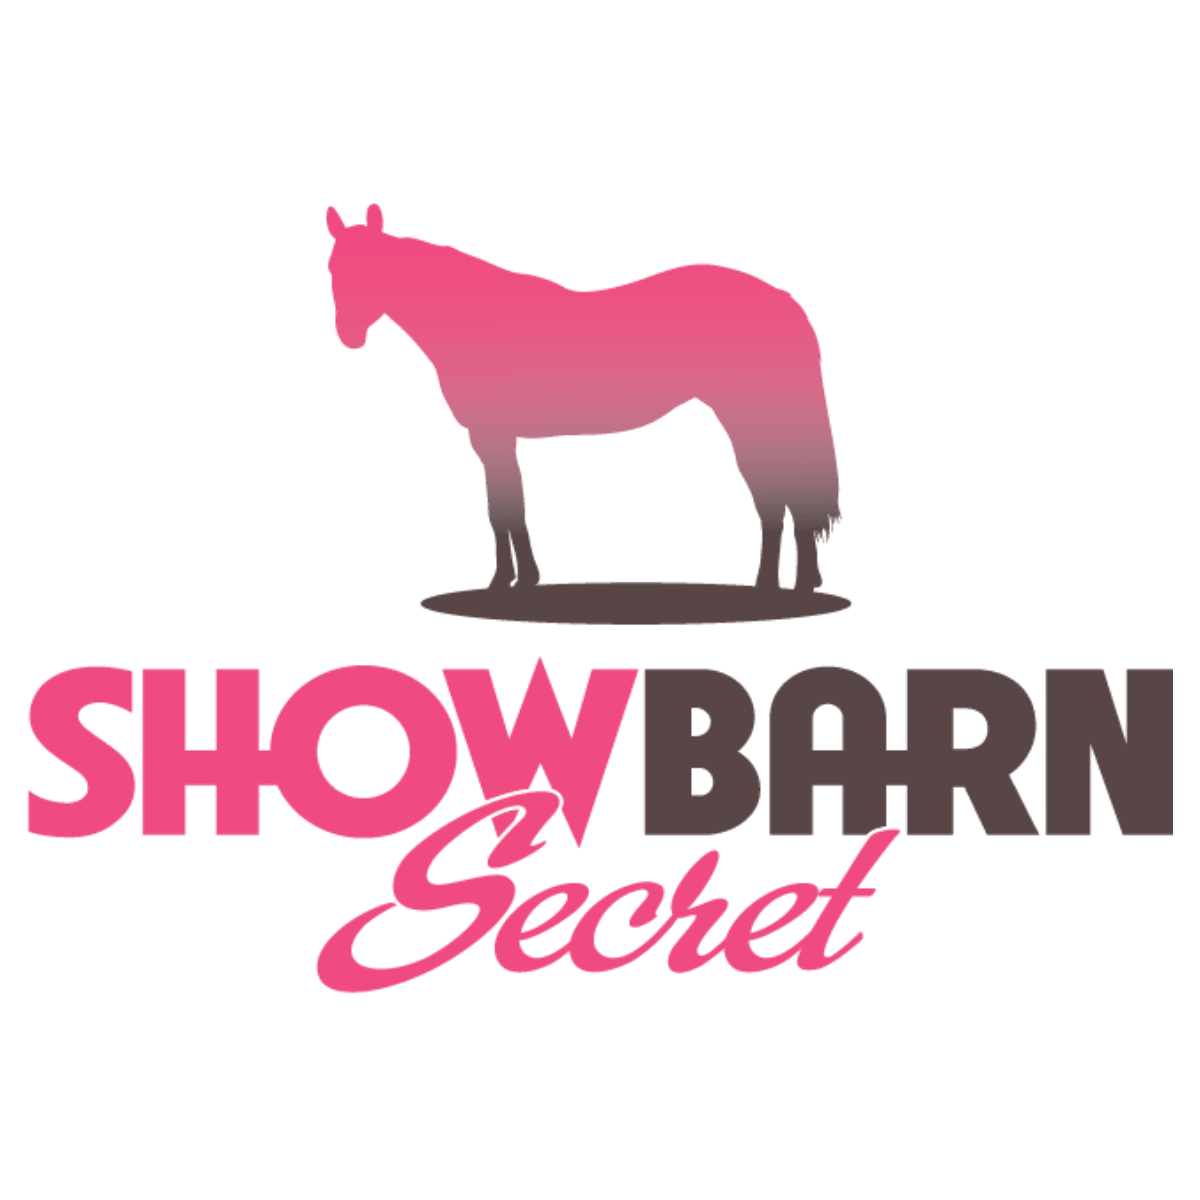 Magical Christmas Eve: Santa's Reindeer Shine Bright with ShowBarn Secret - Draw it Out®